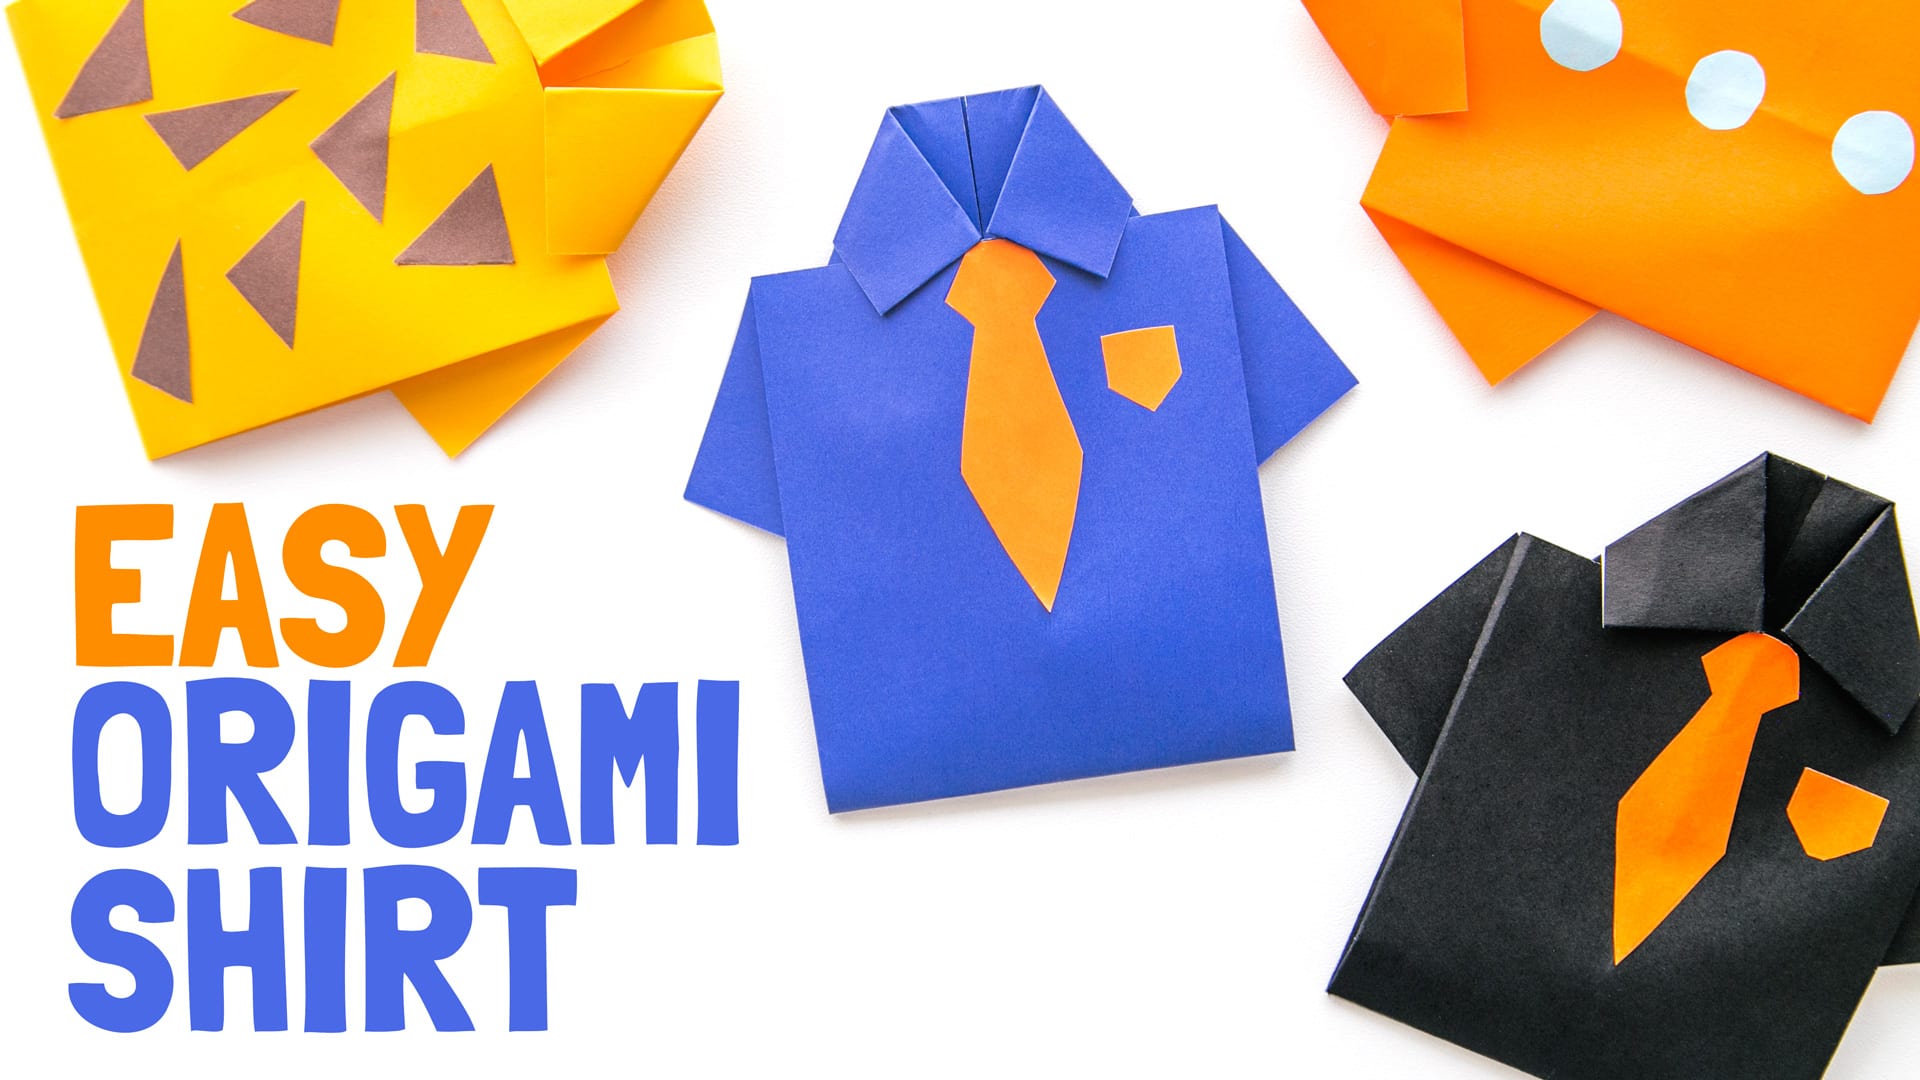 Best Origami Step by Step With Instructions - Easy Crafts For Kids